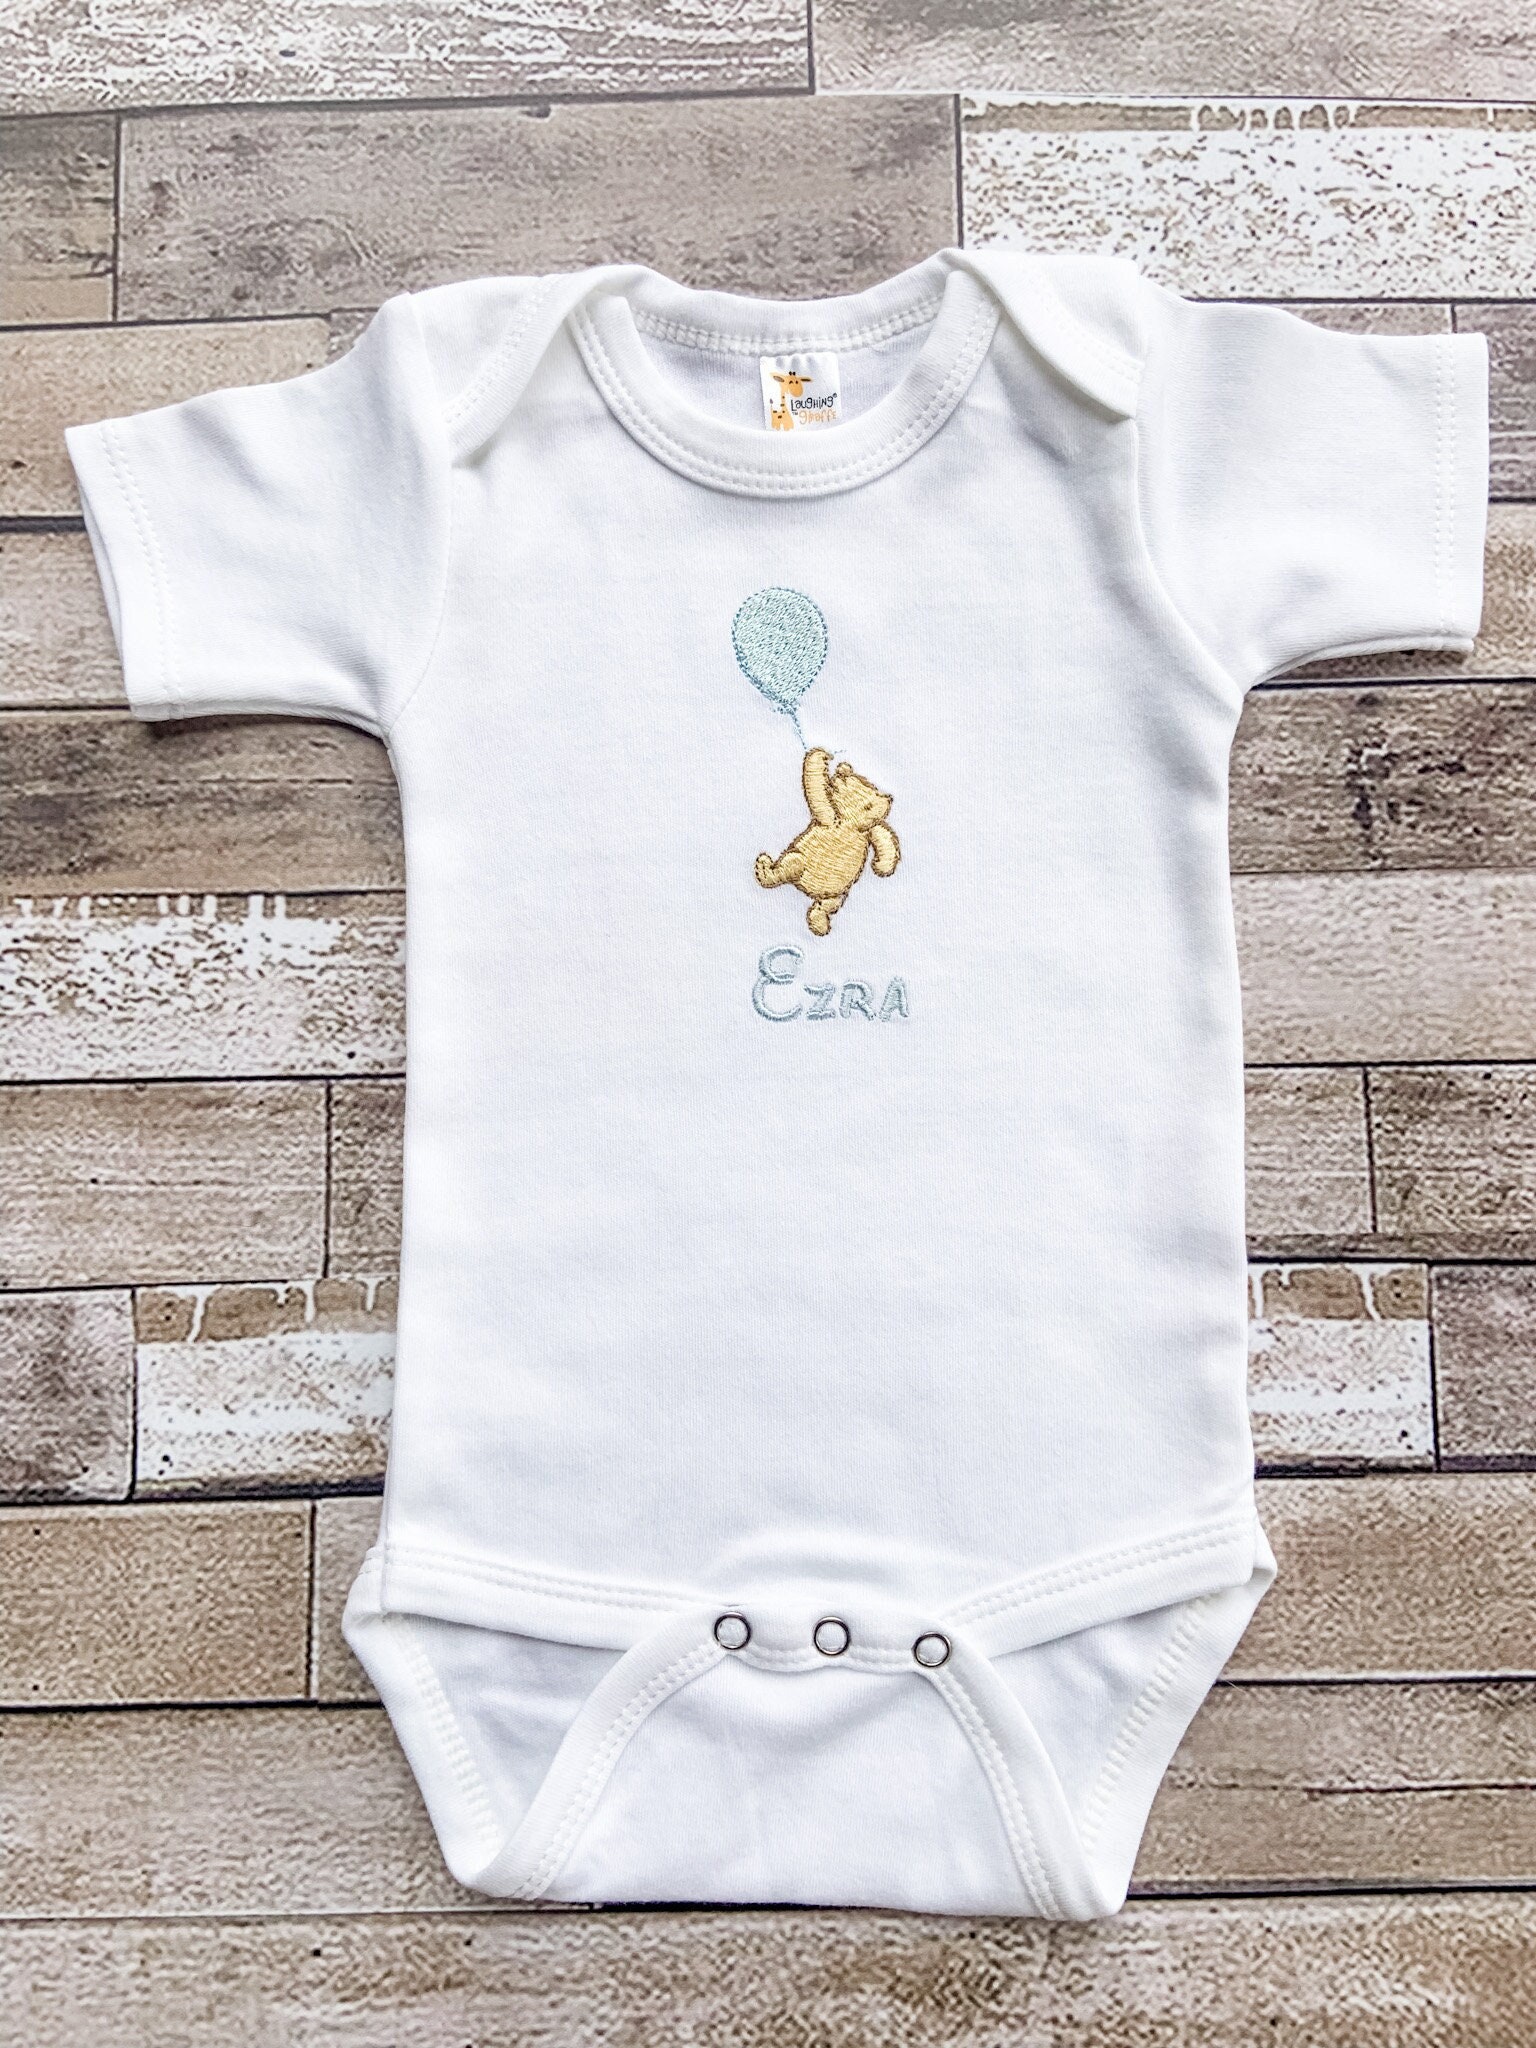 'I Am The Little Brother' Baby Boy Sleepsuit Gift Designed and Printed in the UK Using 100% Fine Combed Cotton 